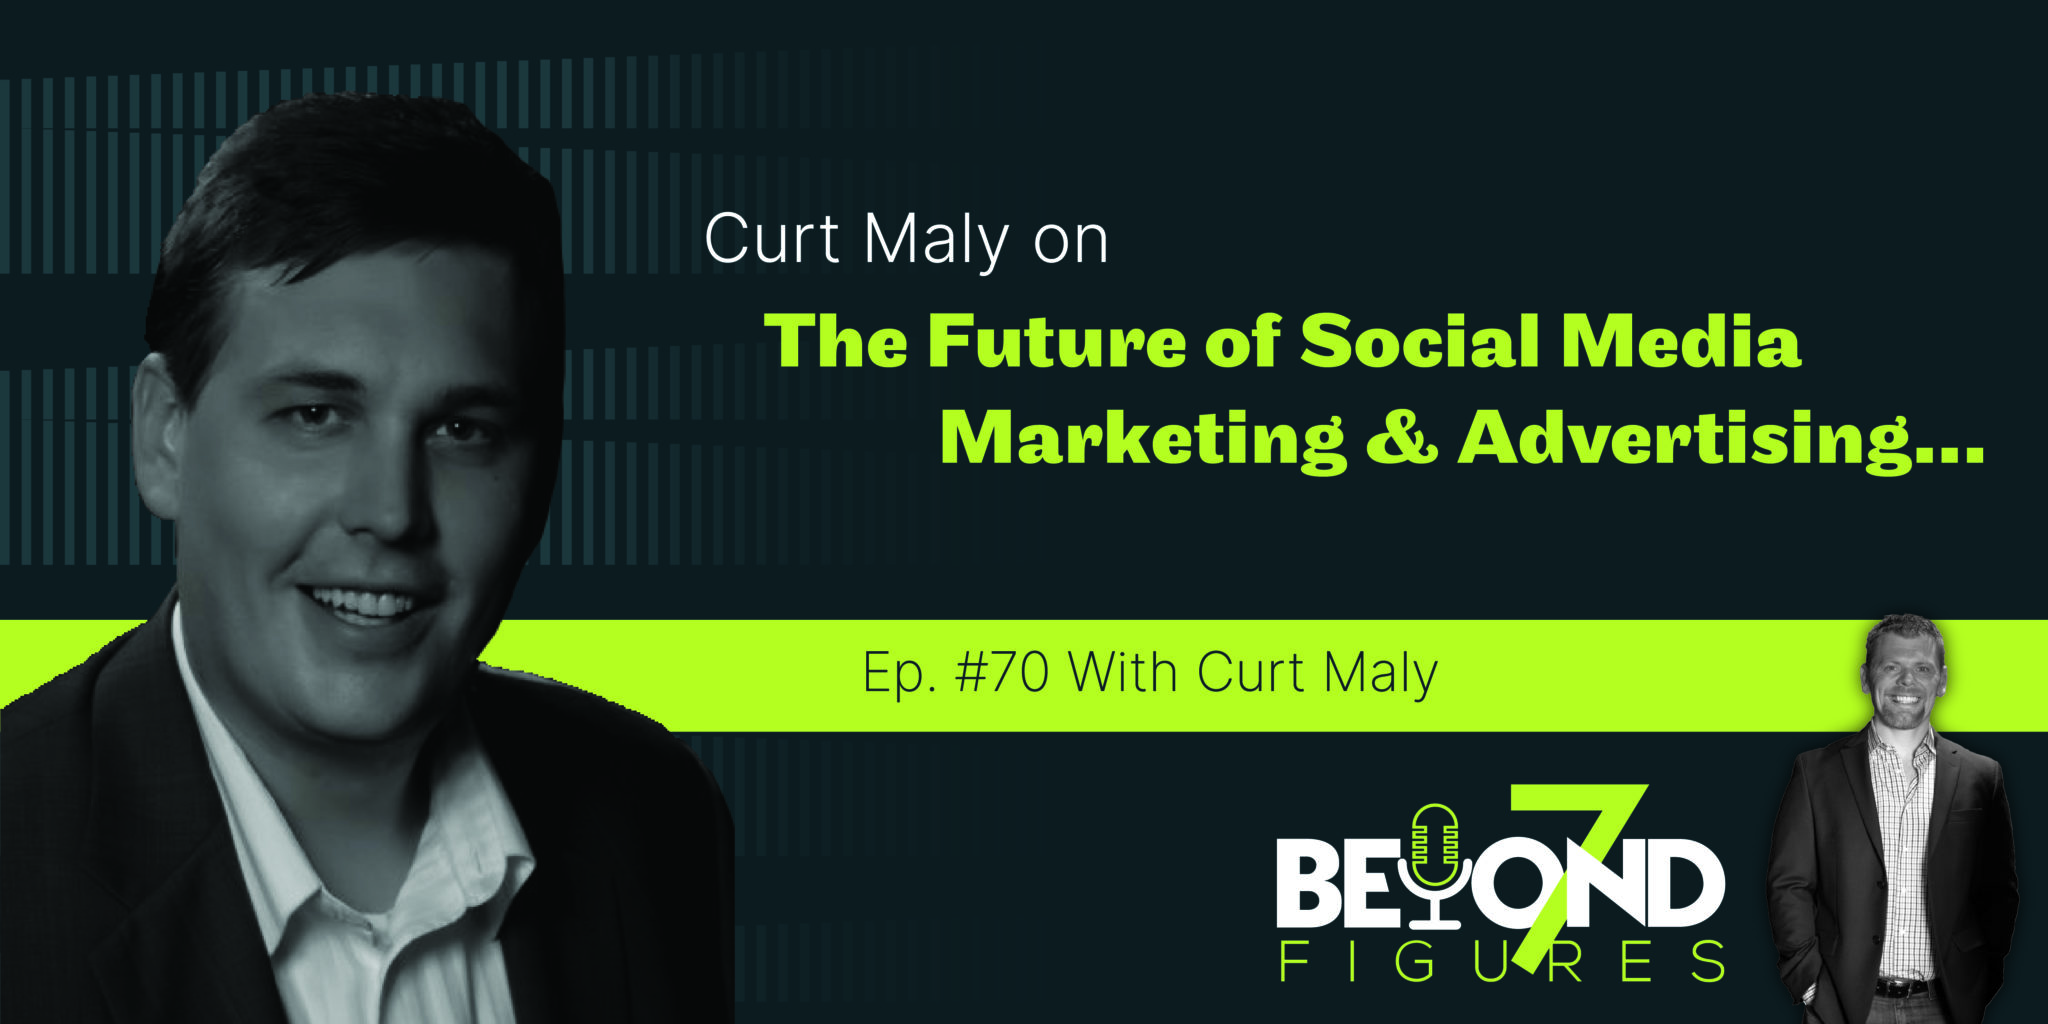 "Curt Maly on The Future of Social Media Marketing & Advertising" (Podcast)